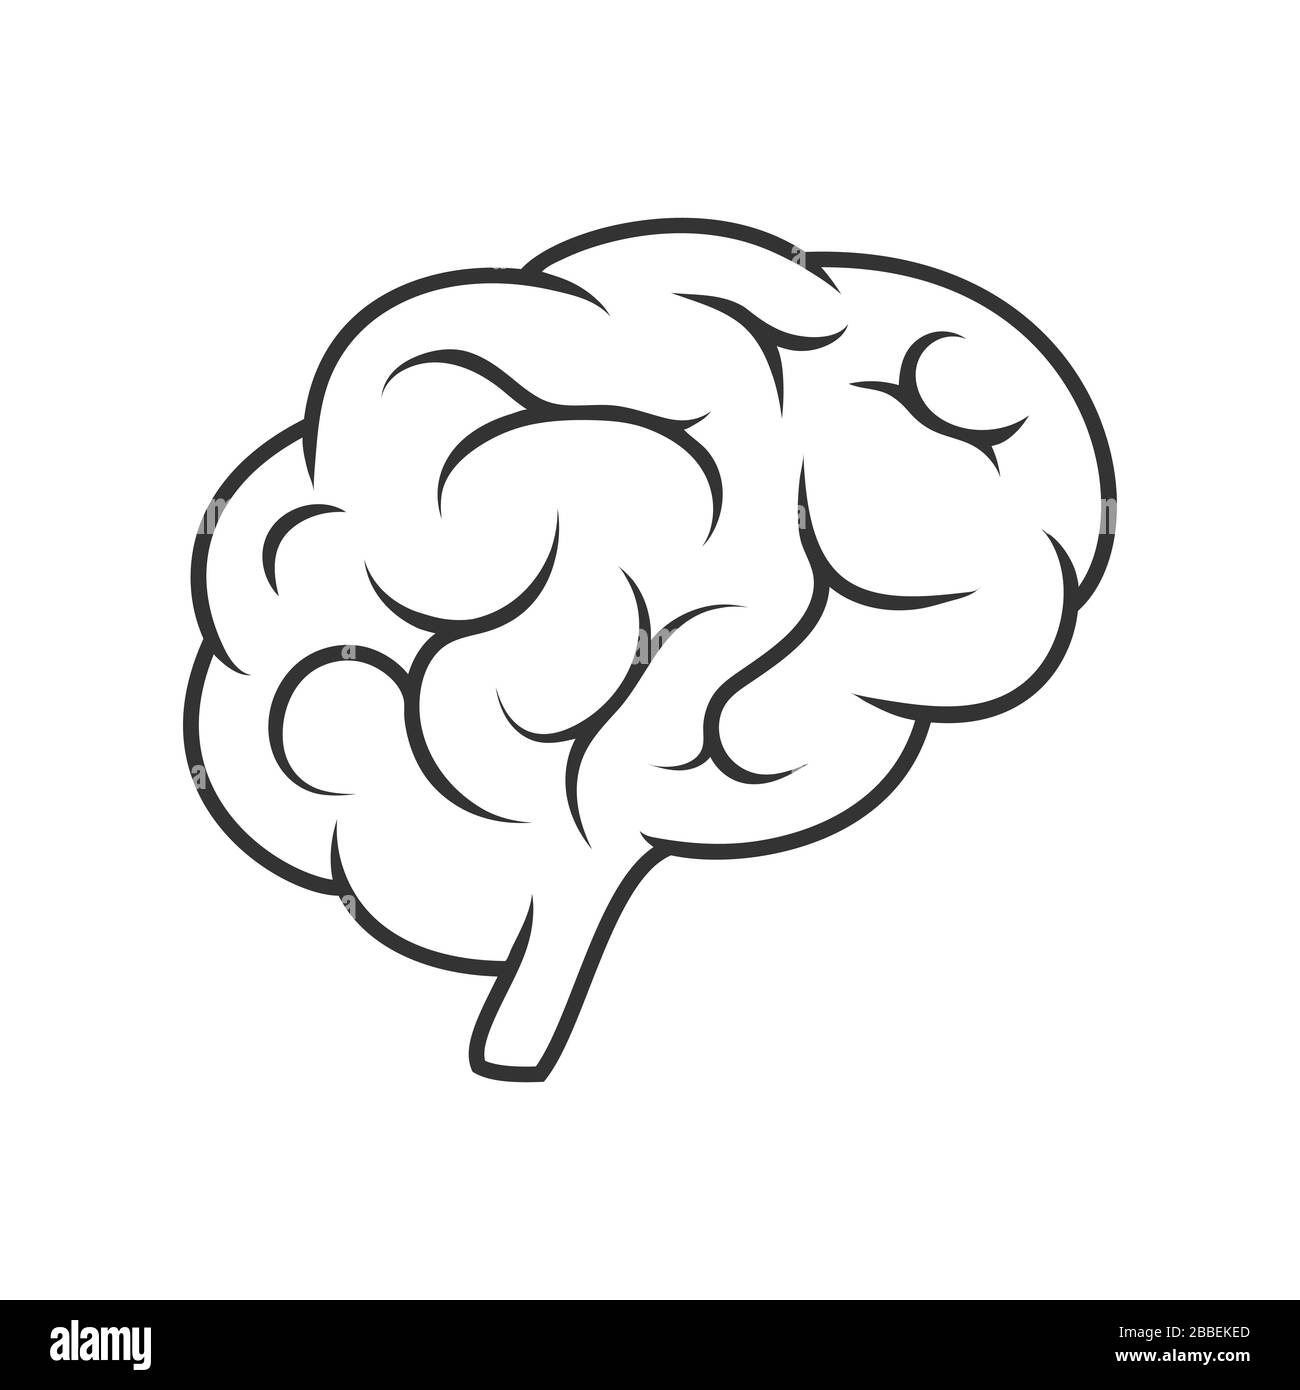 Vector icon, silhouette of the brain. An empty polygon isolated on a white background. Simple flat stock illustration. Stock Vector